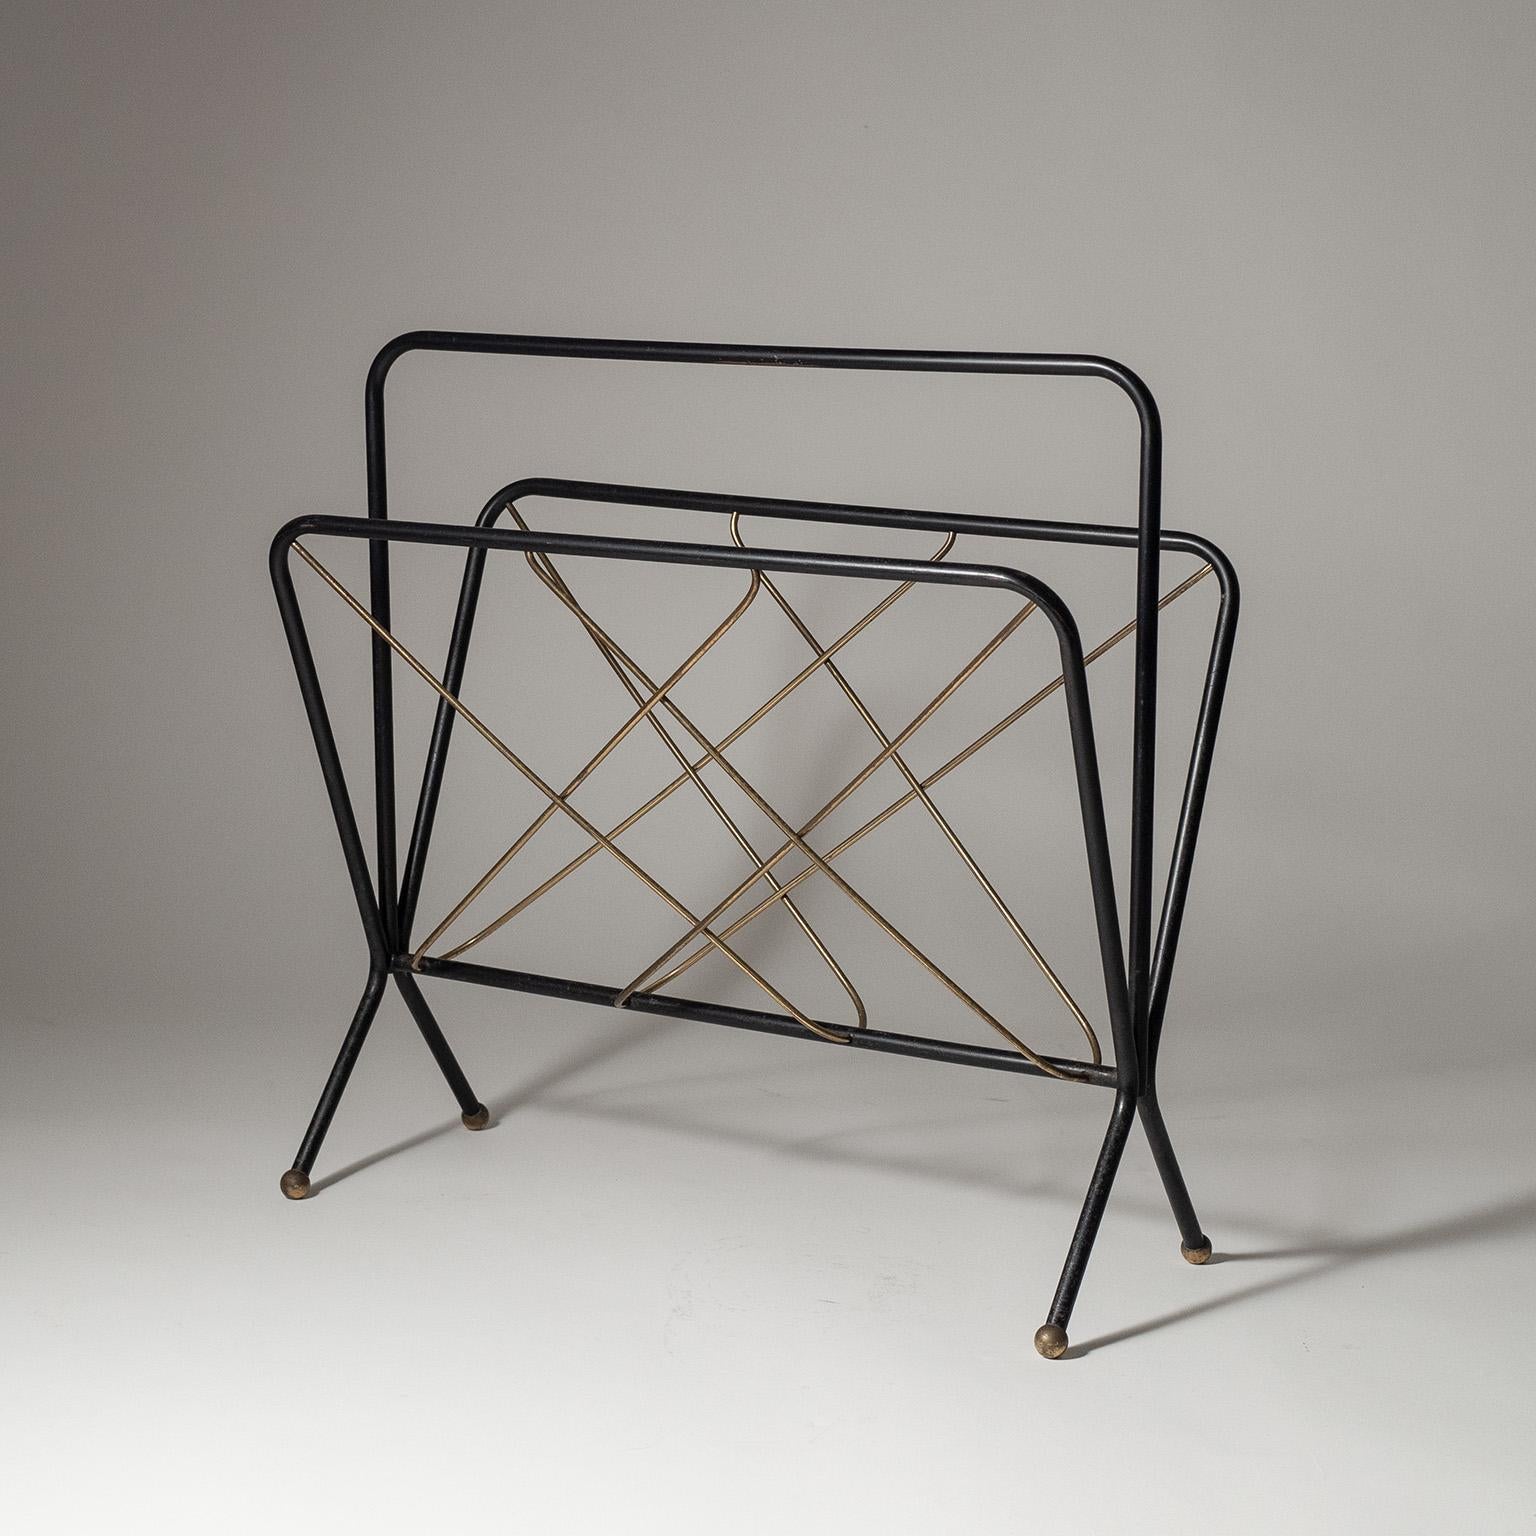 Fine Italian mid-century magazine stand from the 1950s. Blackened steel frame with brass 